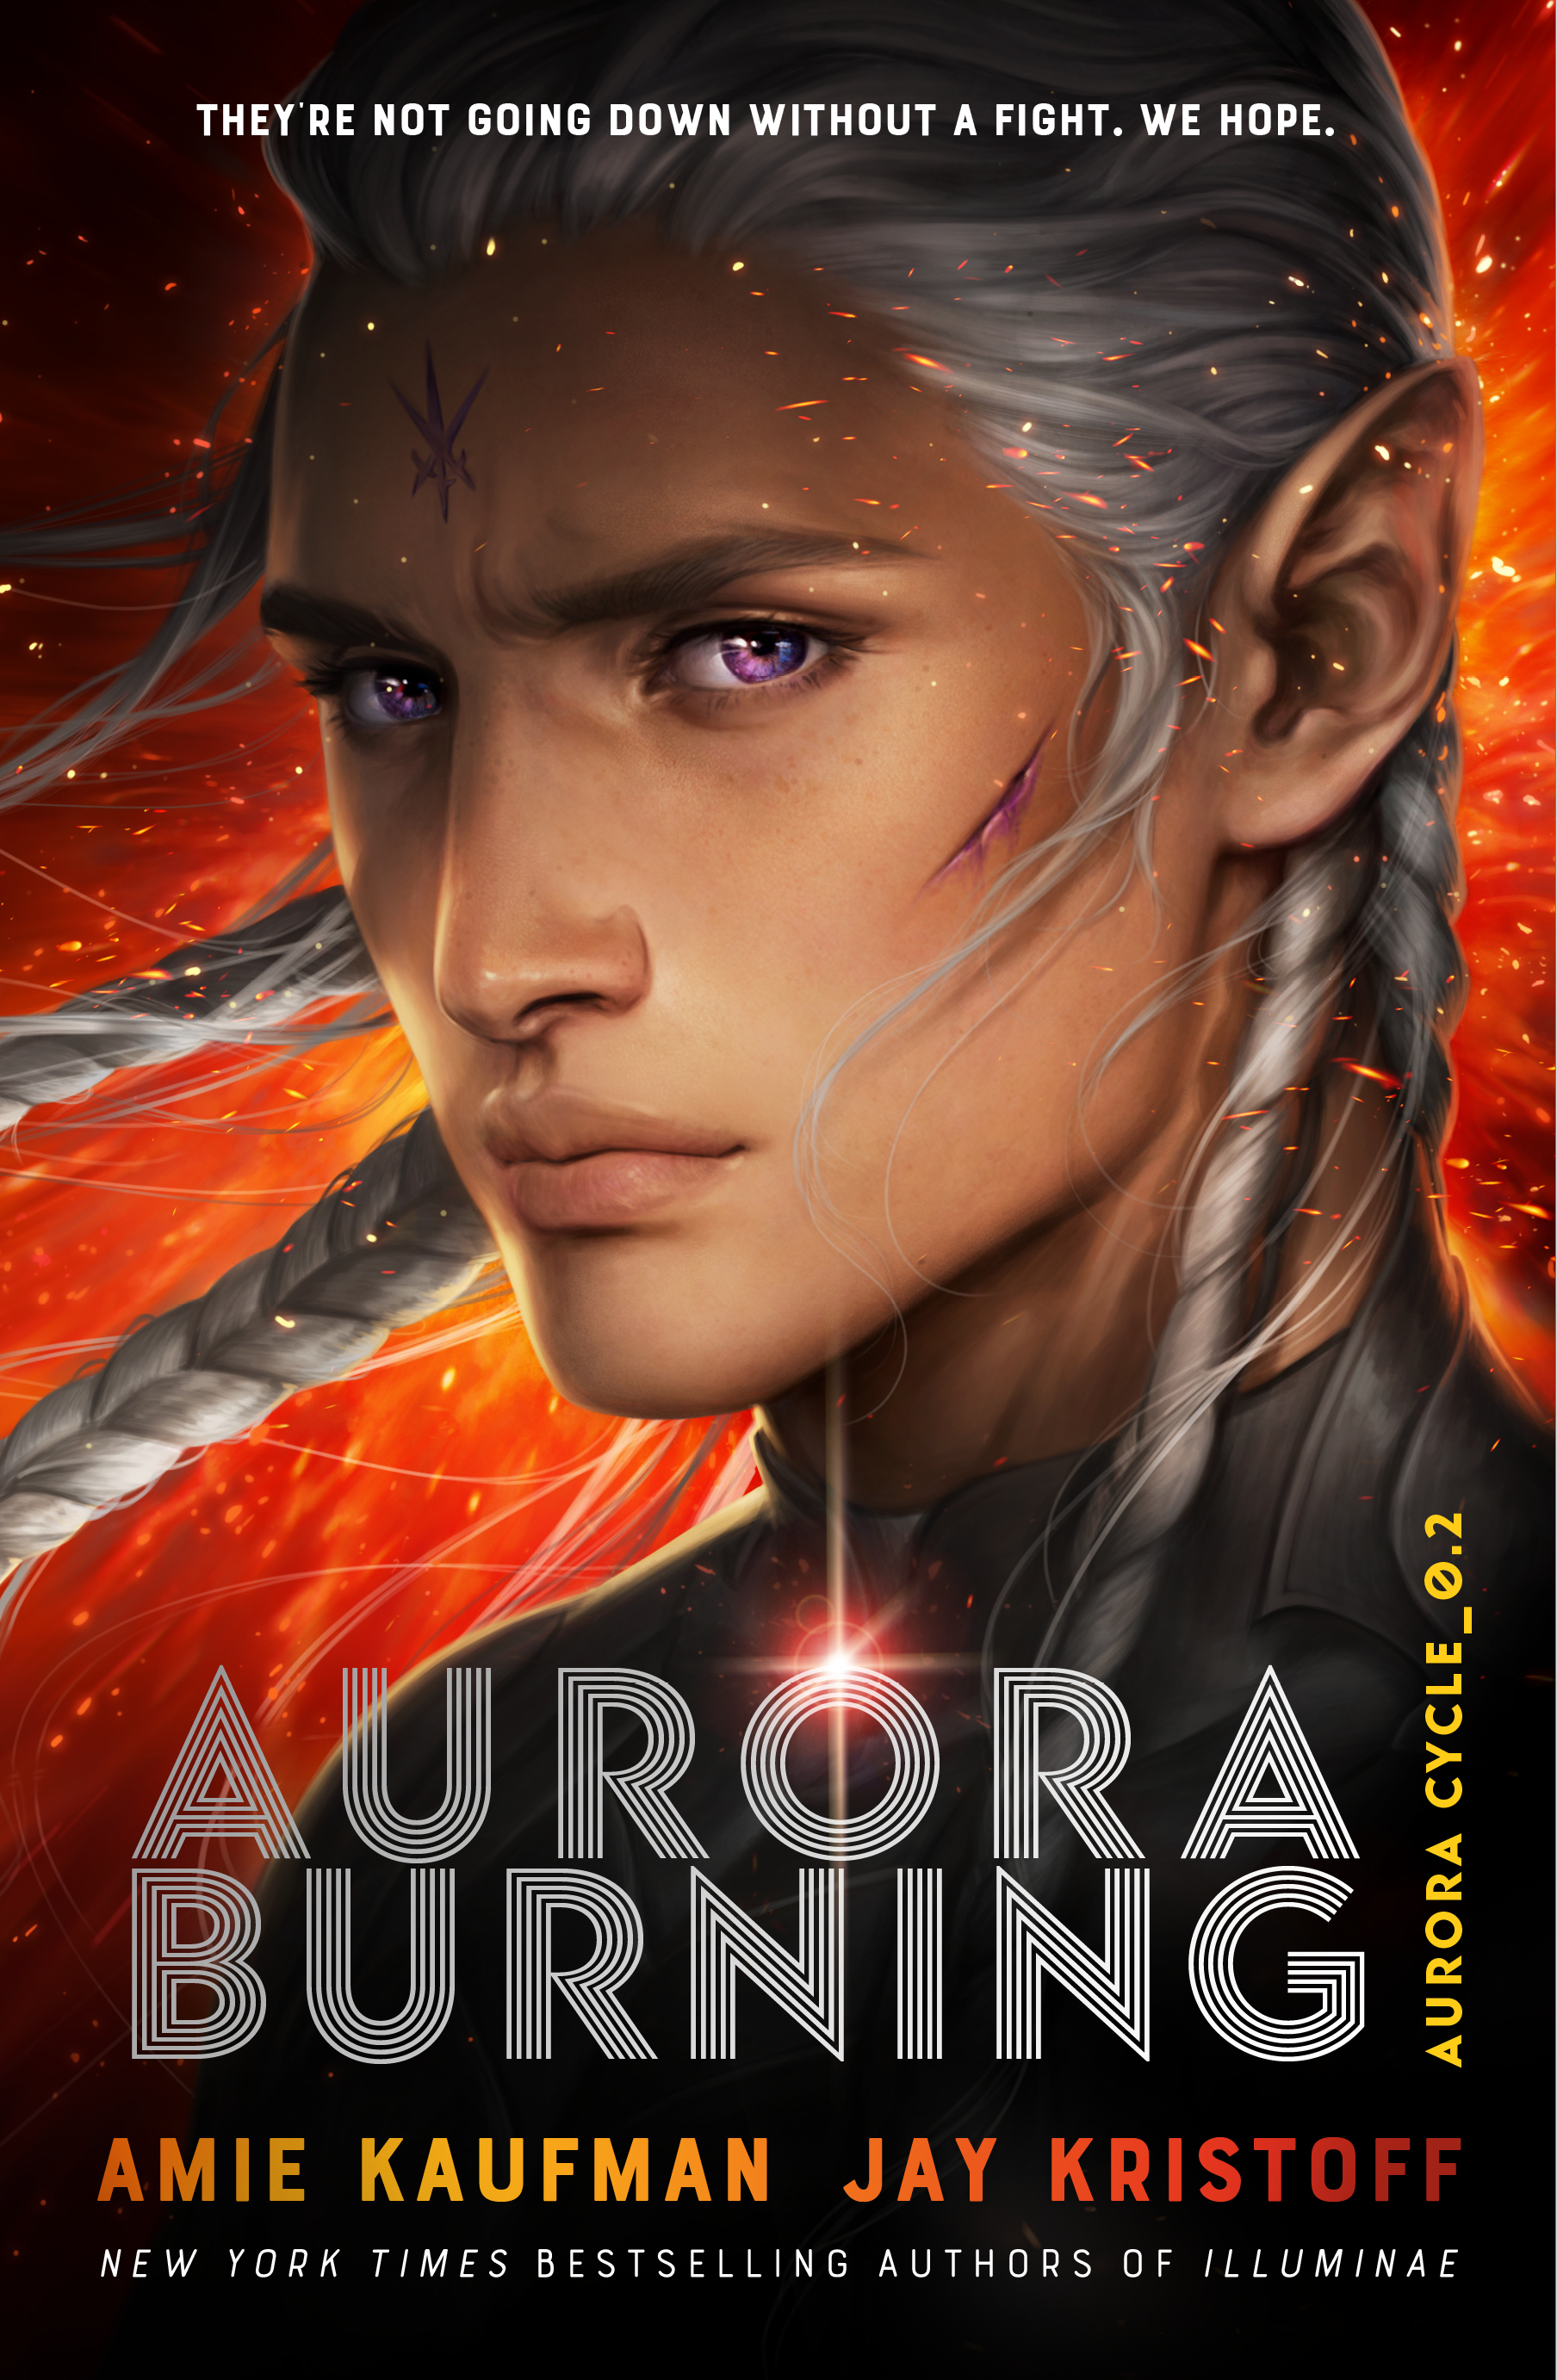 Book cover for AURORA BURNING: Guy with violet eyes stares out of the page, his white braided hair blwoing around his face against a fiery orange background above the title